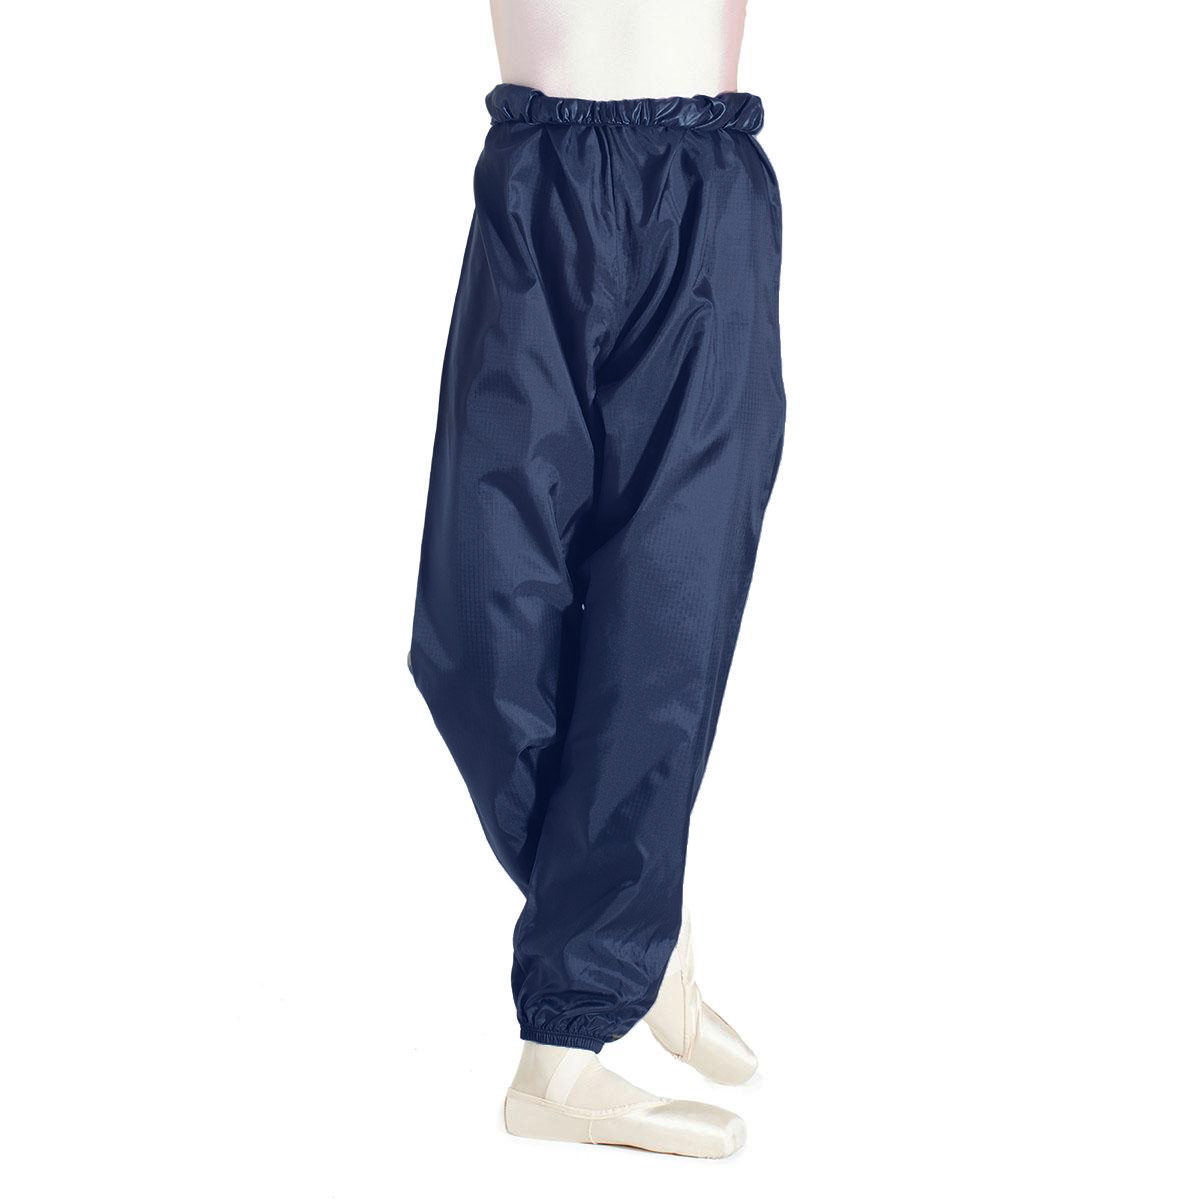 ladies warm up pants - OFF-65% >Free Delivery